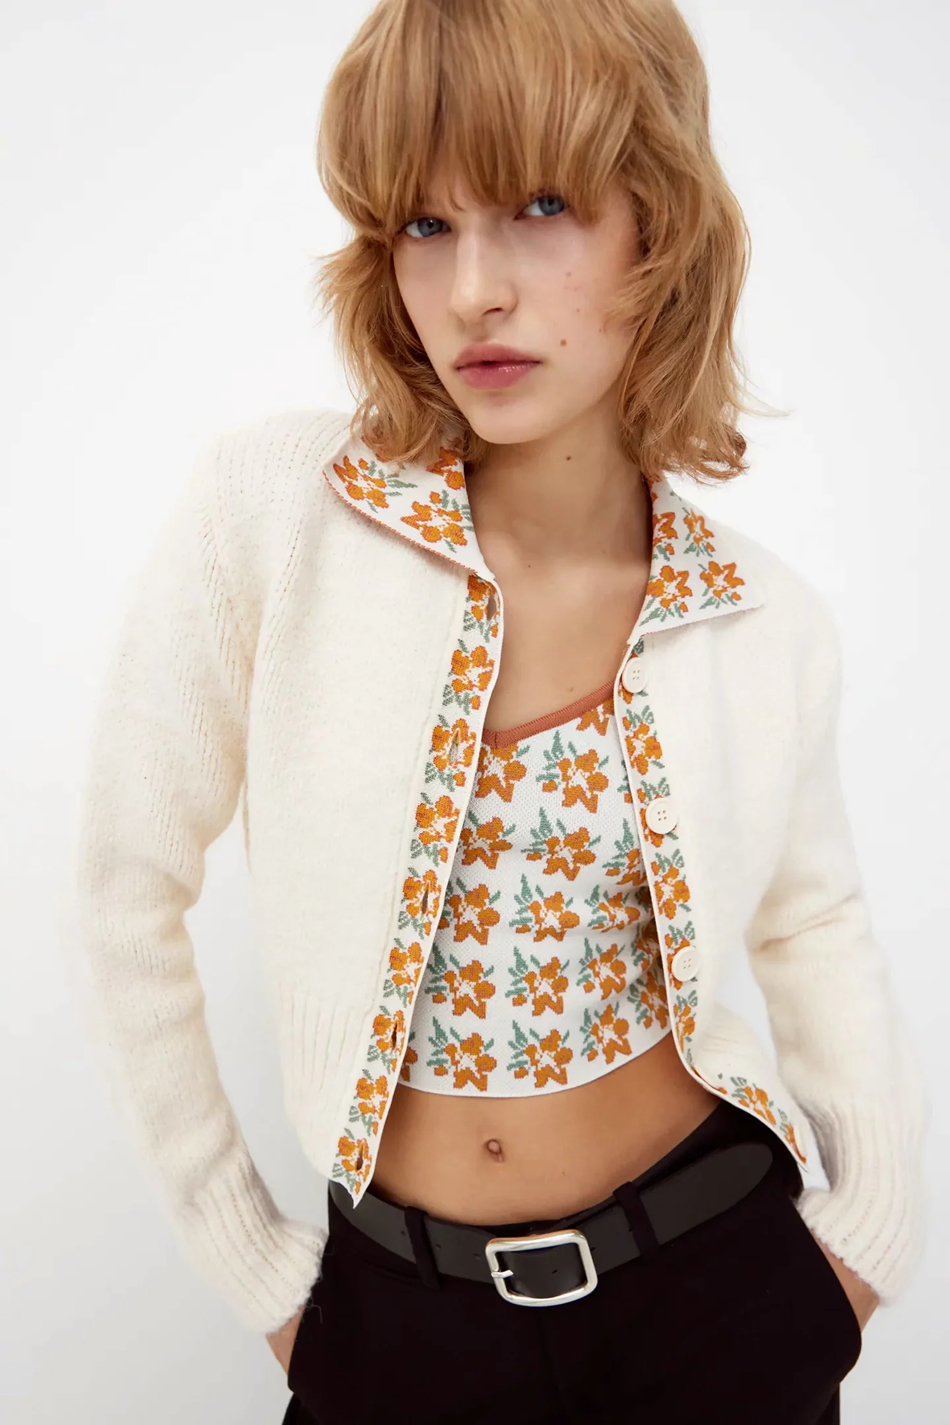 Fashion Creamy-white Paneled Contrast Floral Knitted Jacket,Sweater